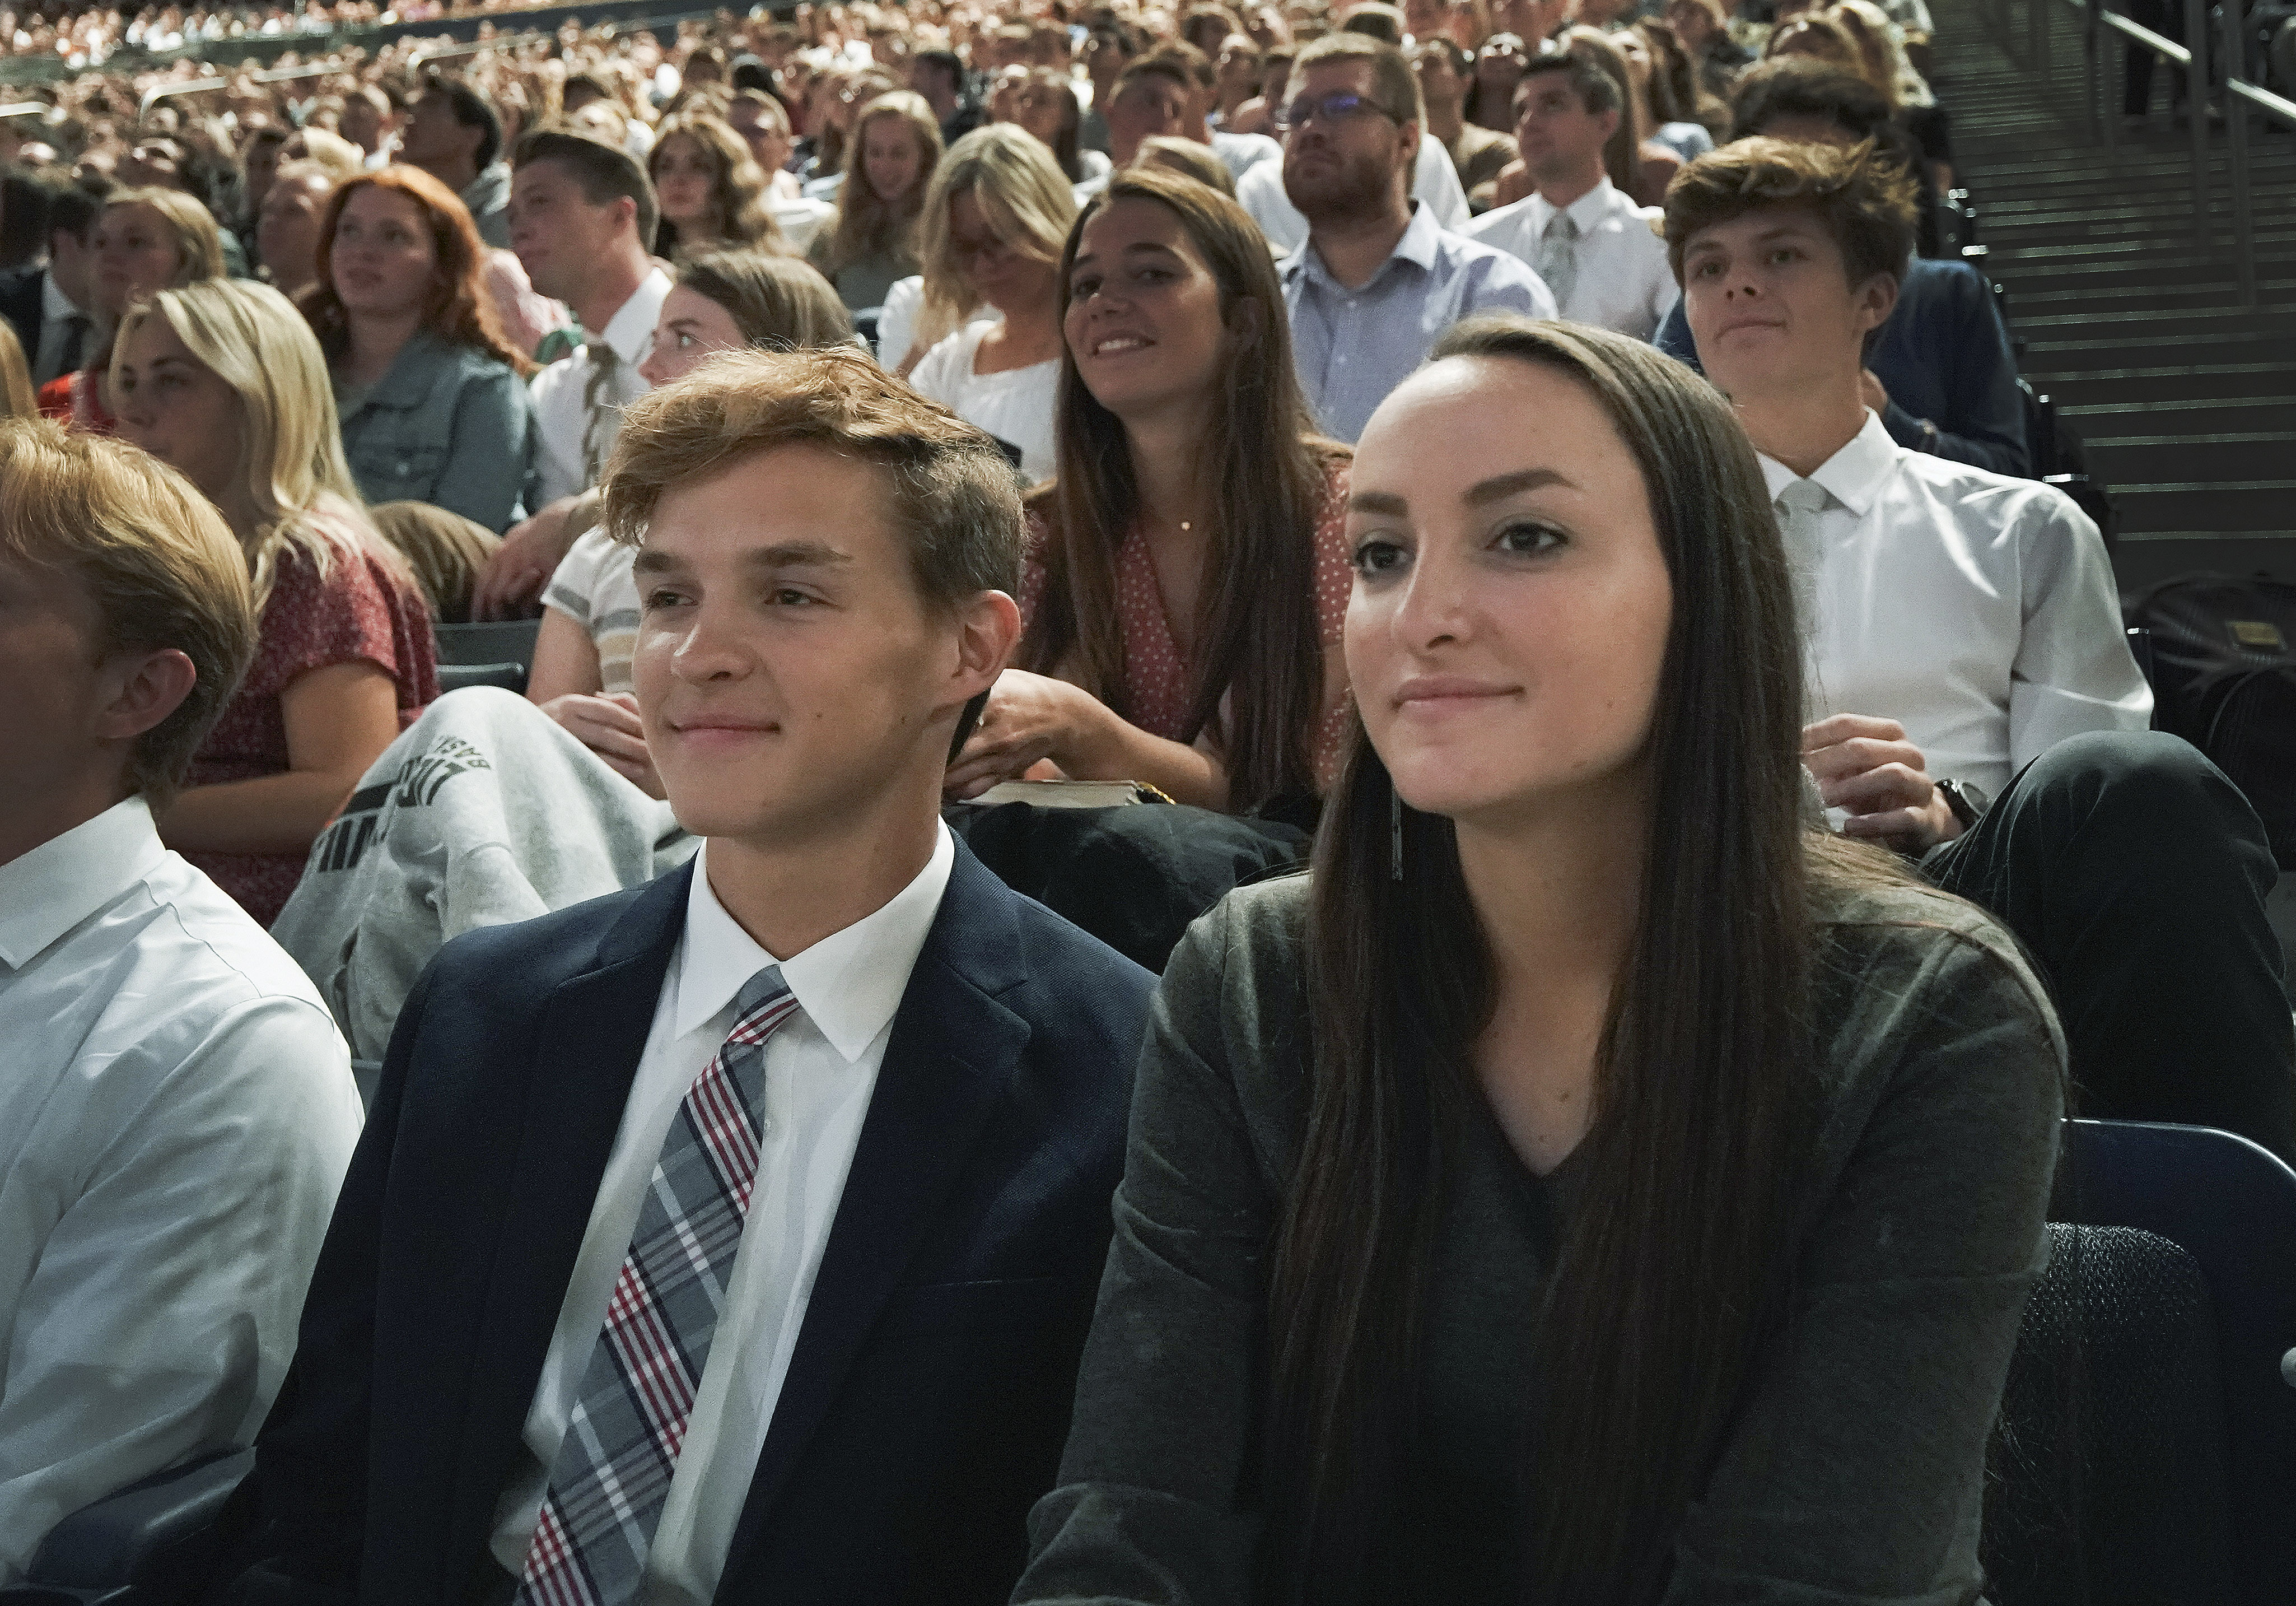 Garrett and Madison Brown, brother and sister, listen to President Russell M. Nelson of The Church of Jesus Christ of Latter-day Saints during a devotional at Brigham Young University in Provo on Tuesday, Sept. 17, 2019.